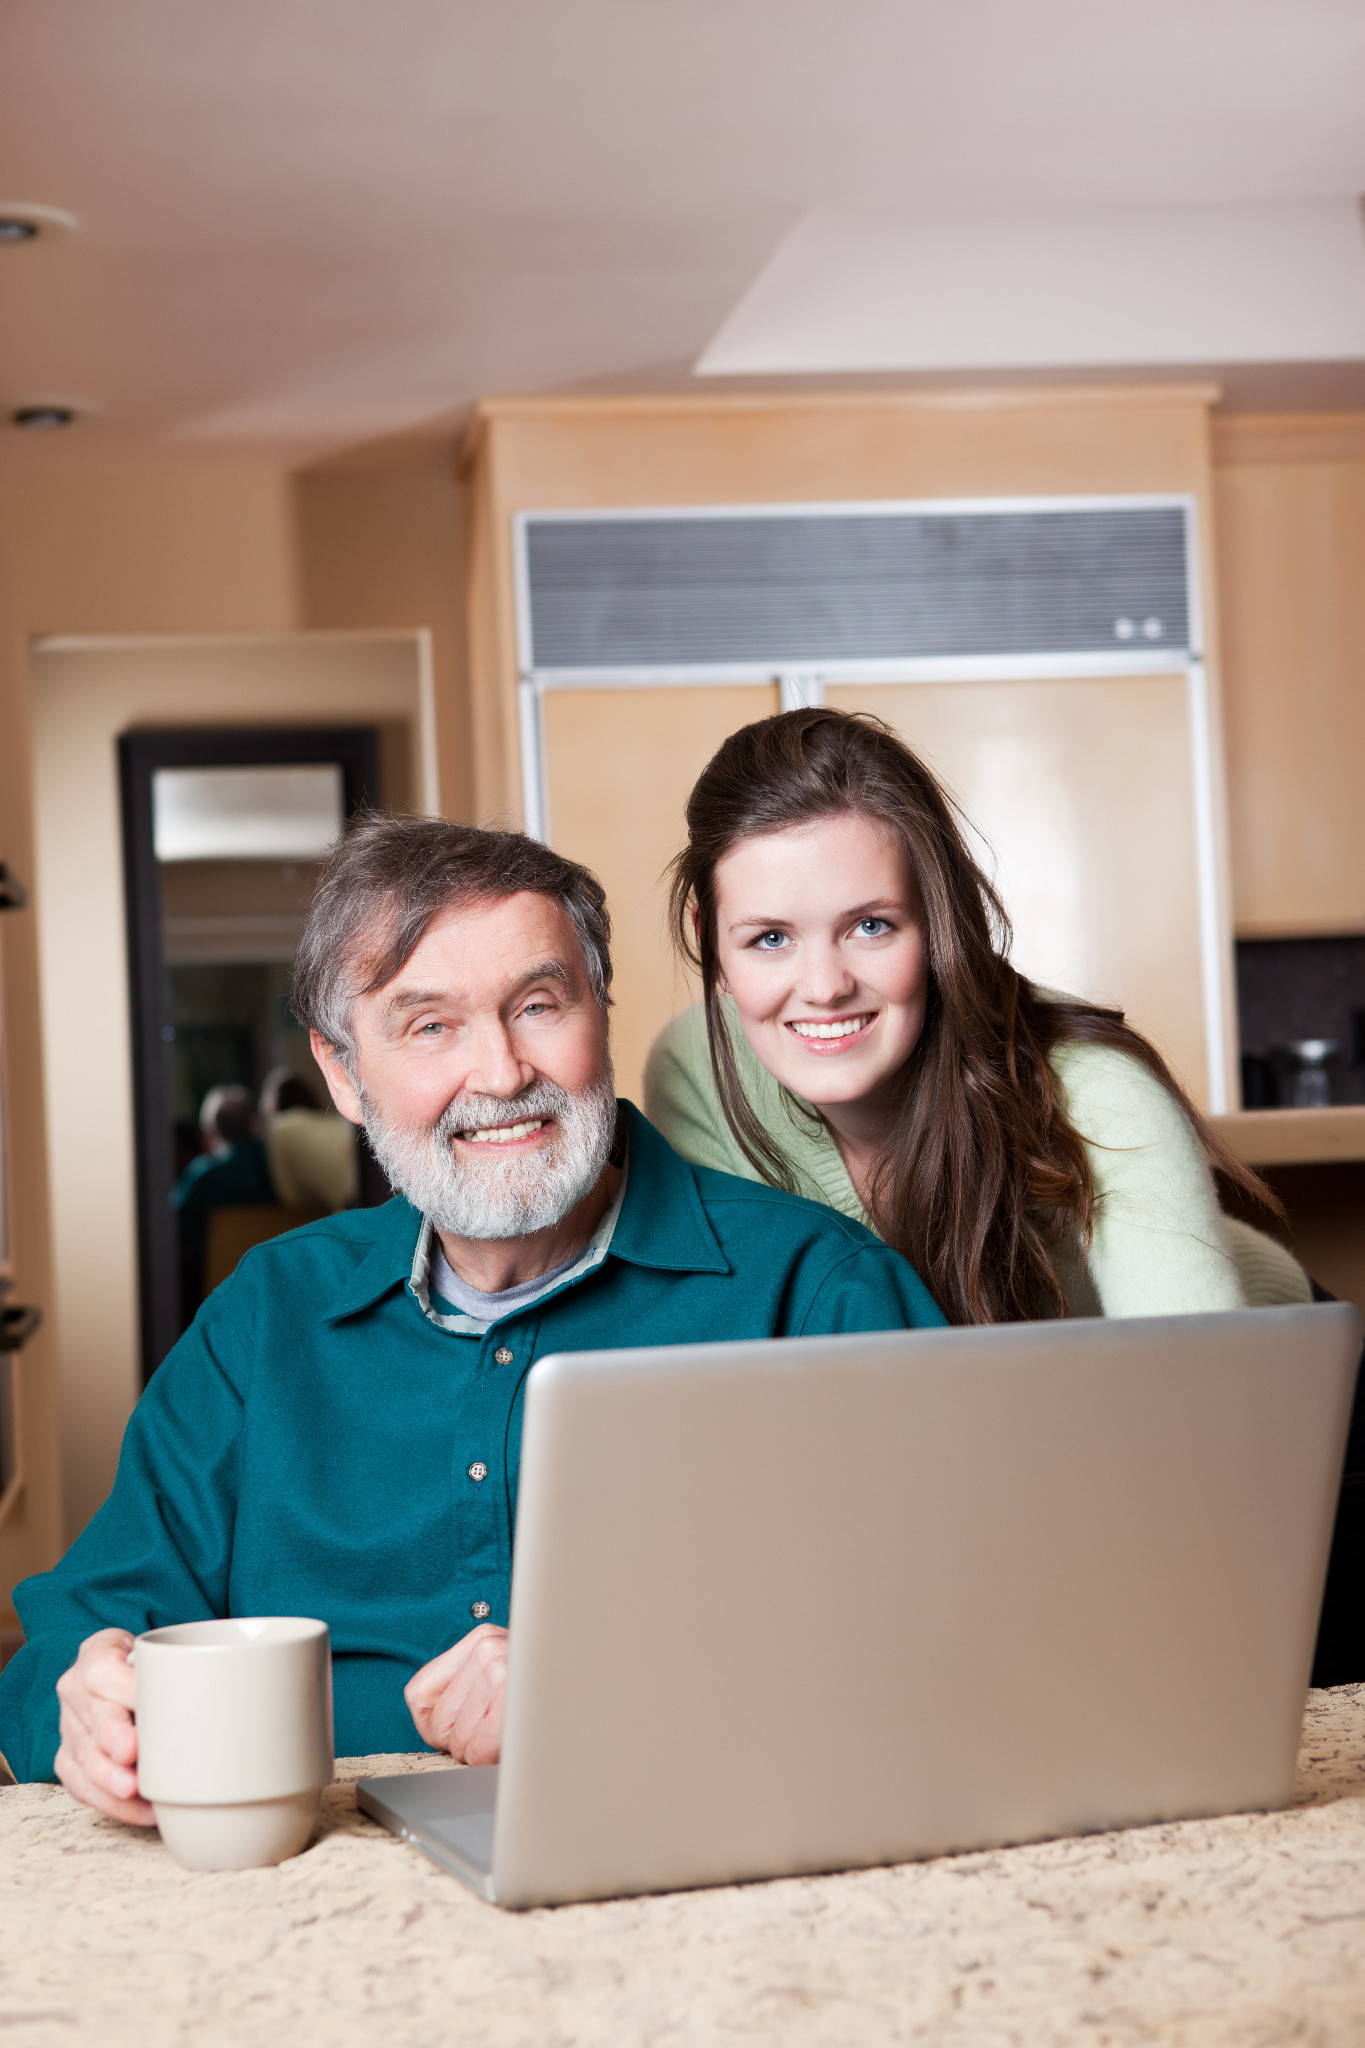 Benefits of Learning New Technology for Seniors